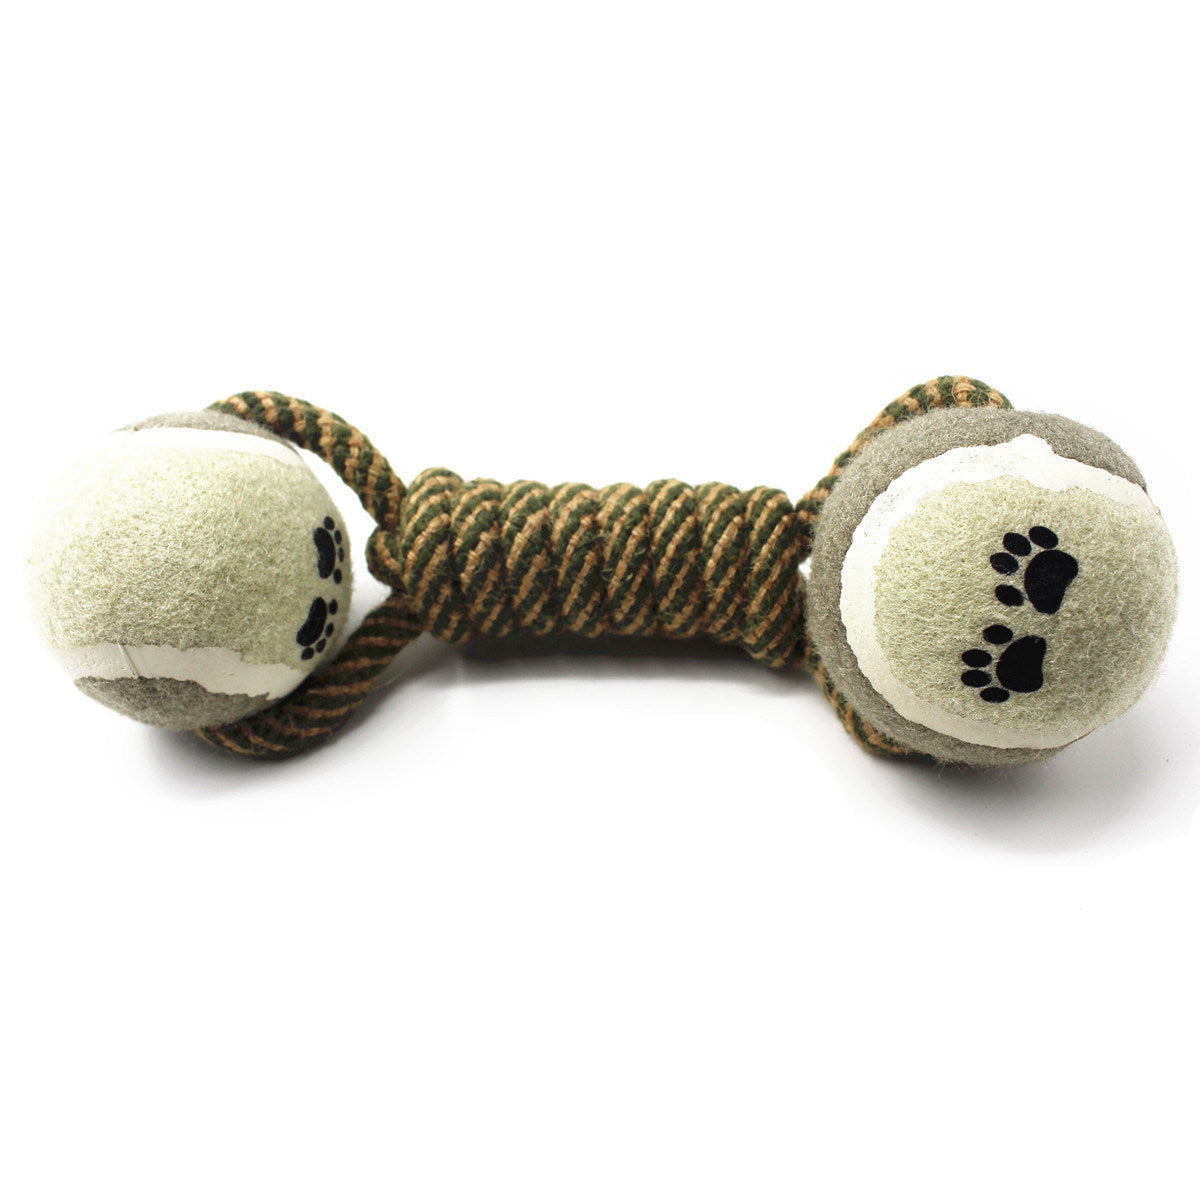 Braided Rope Chew Toy